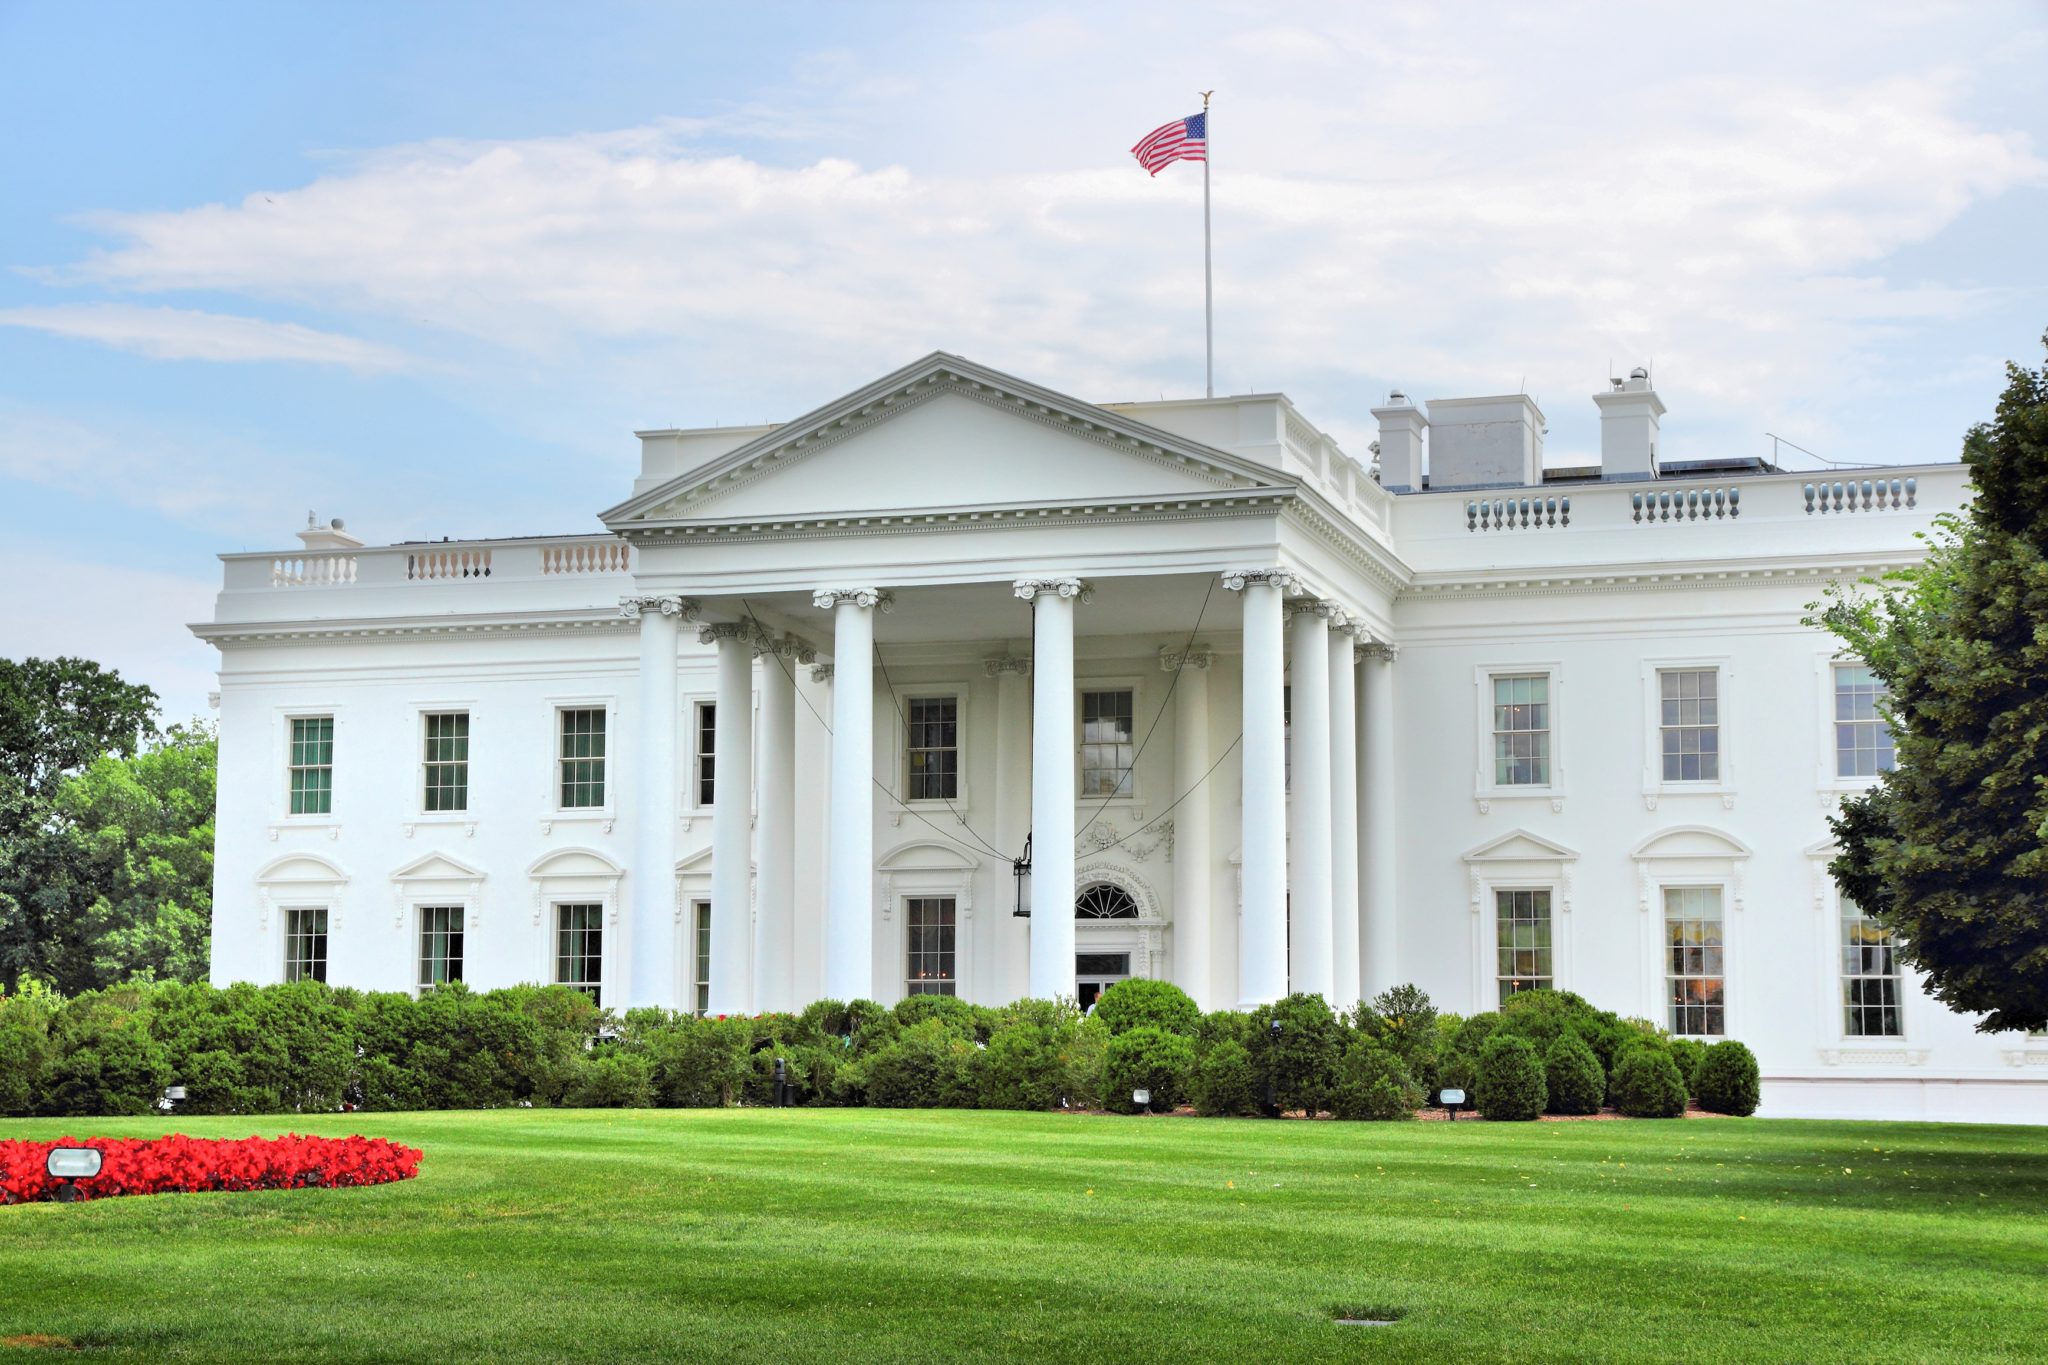 The White House wants to free up more spectrum for phones, 5G and 6G home internet, and more